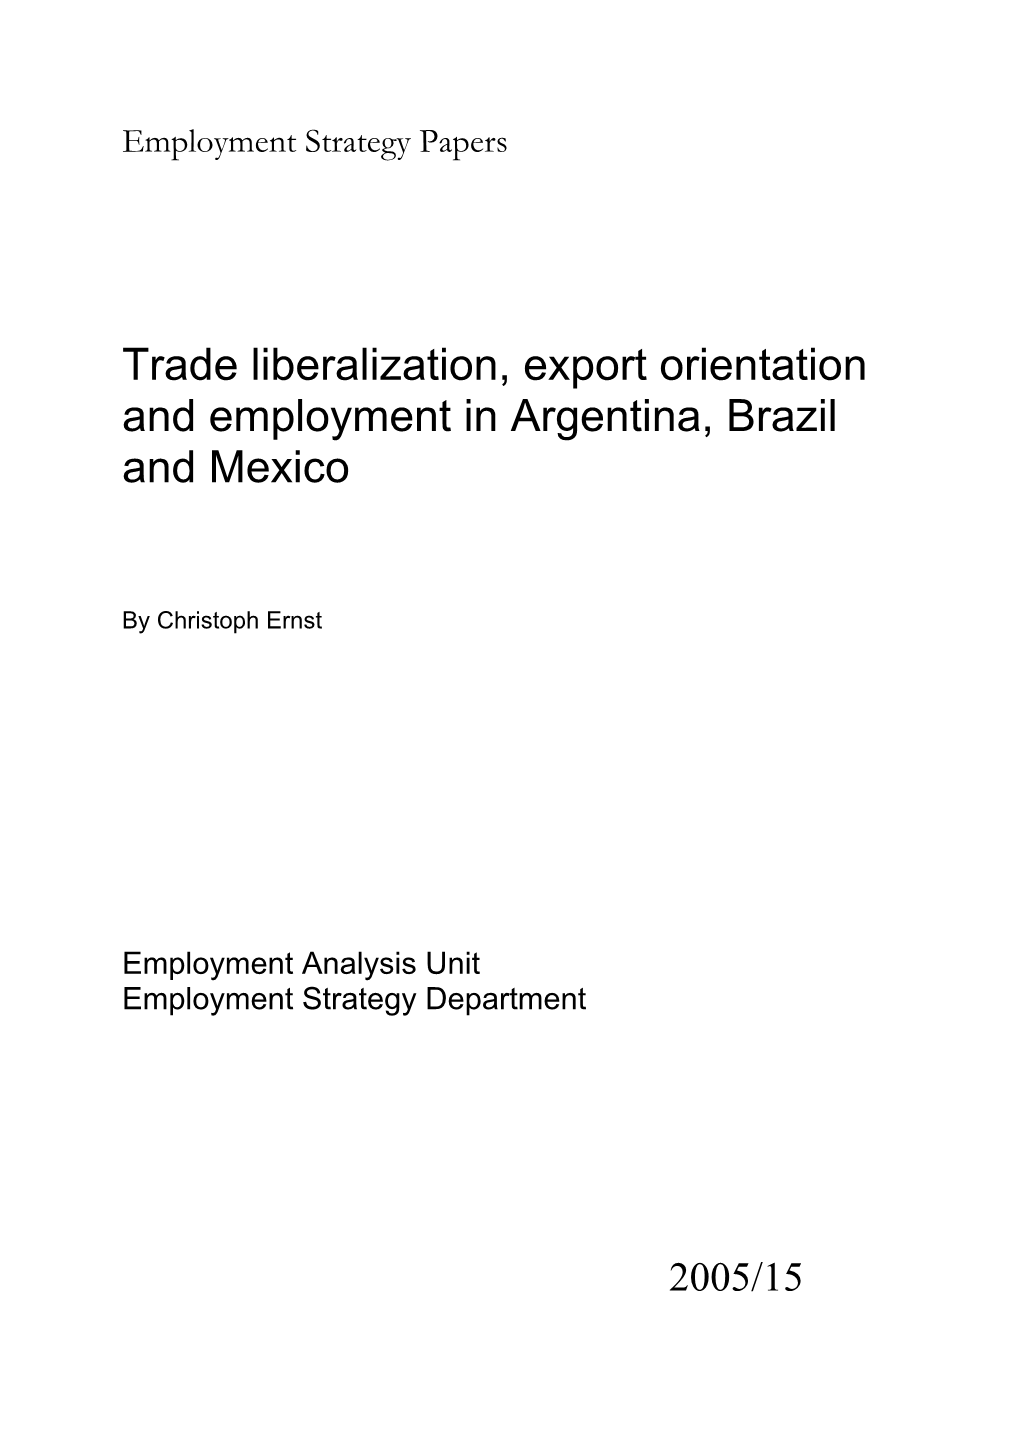 Trade Liberalization, Export Orientation and Employment in Argentina, Brazil and Mexico